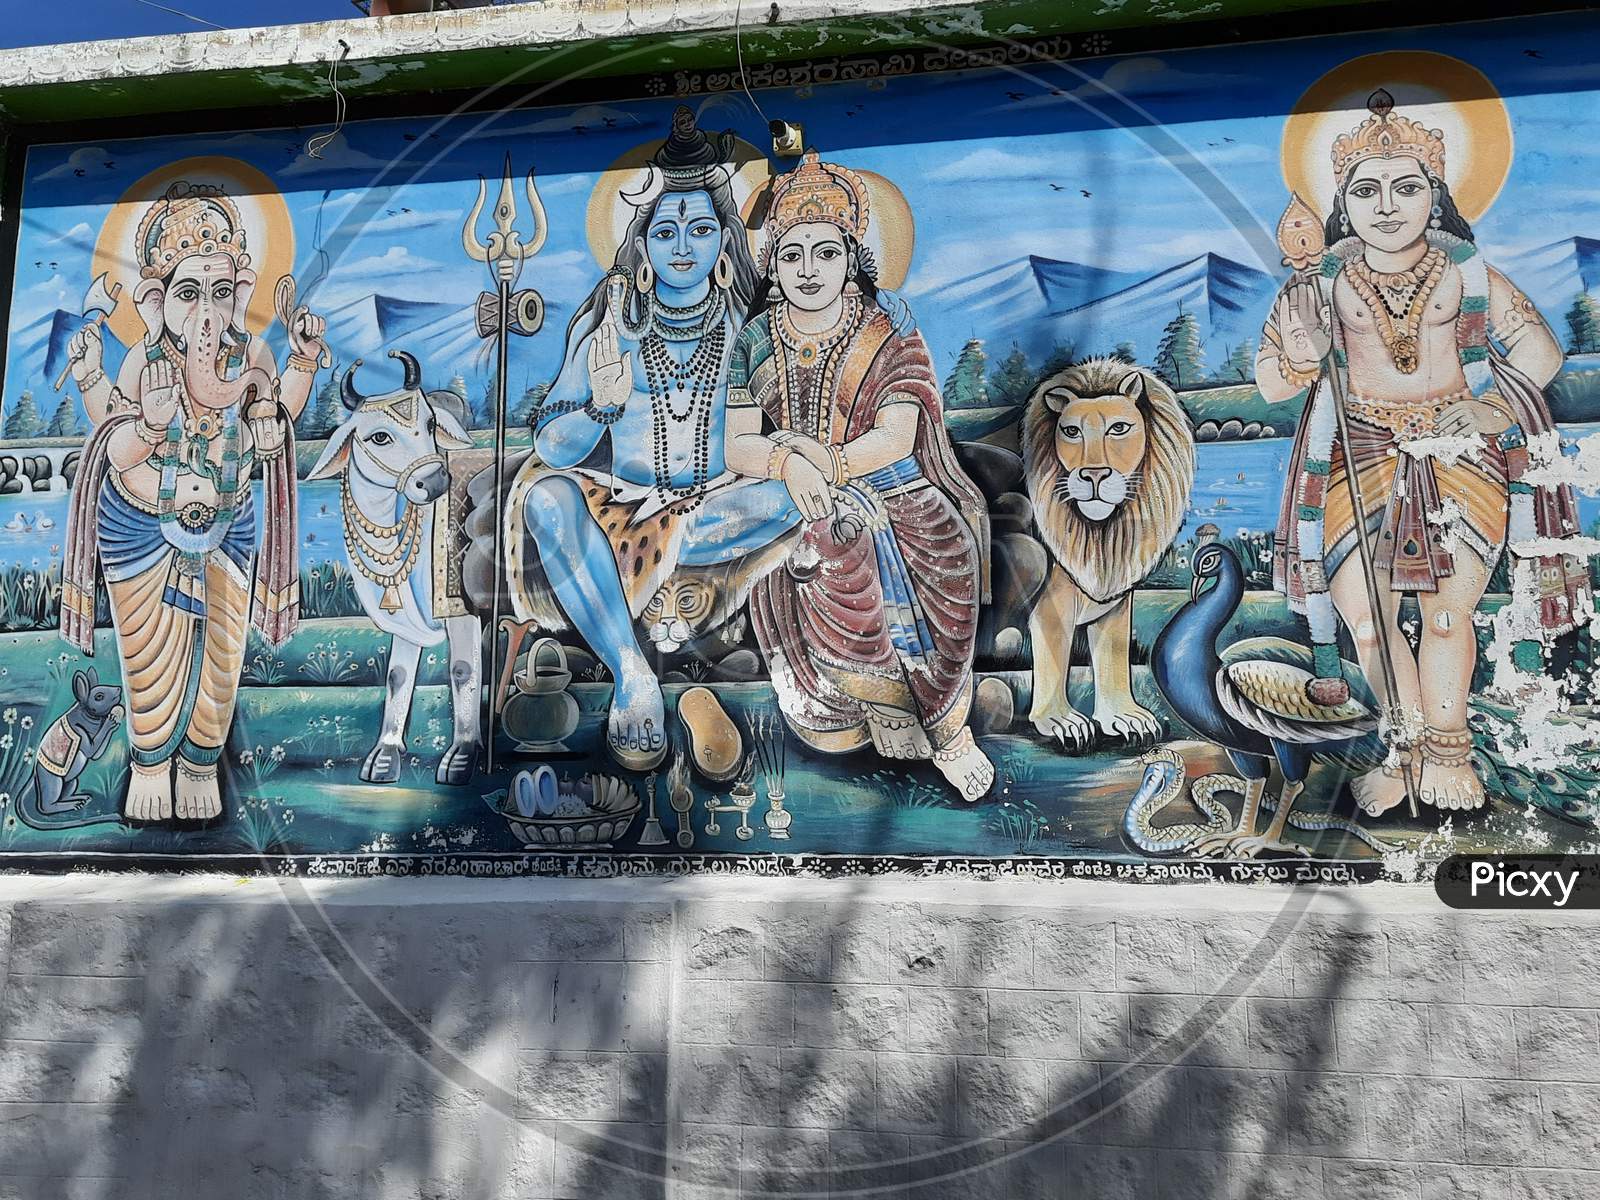 Closeup Of Lord Shiva And His Family Painting Above Wall Of Arkeshwara Temple, Guttalu, India